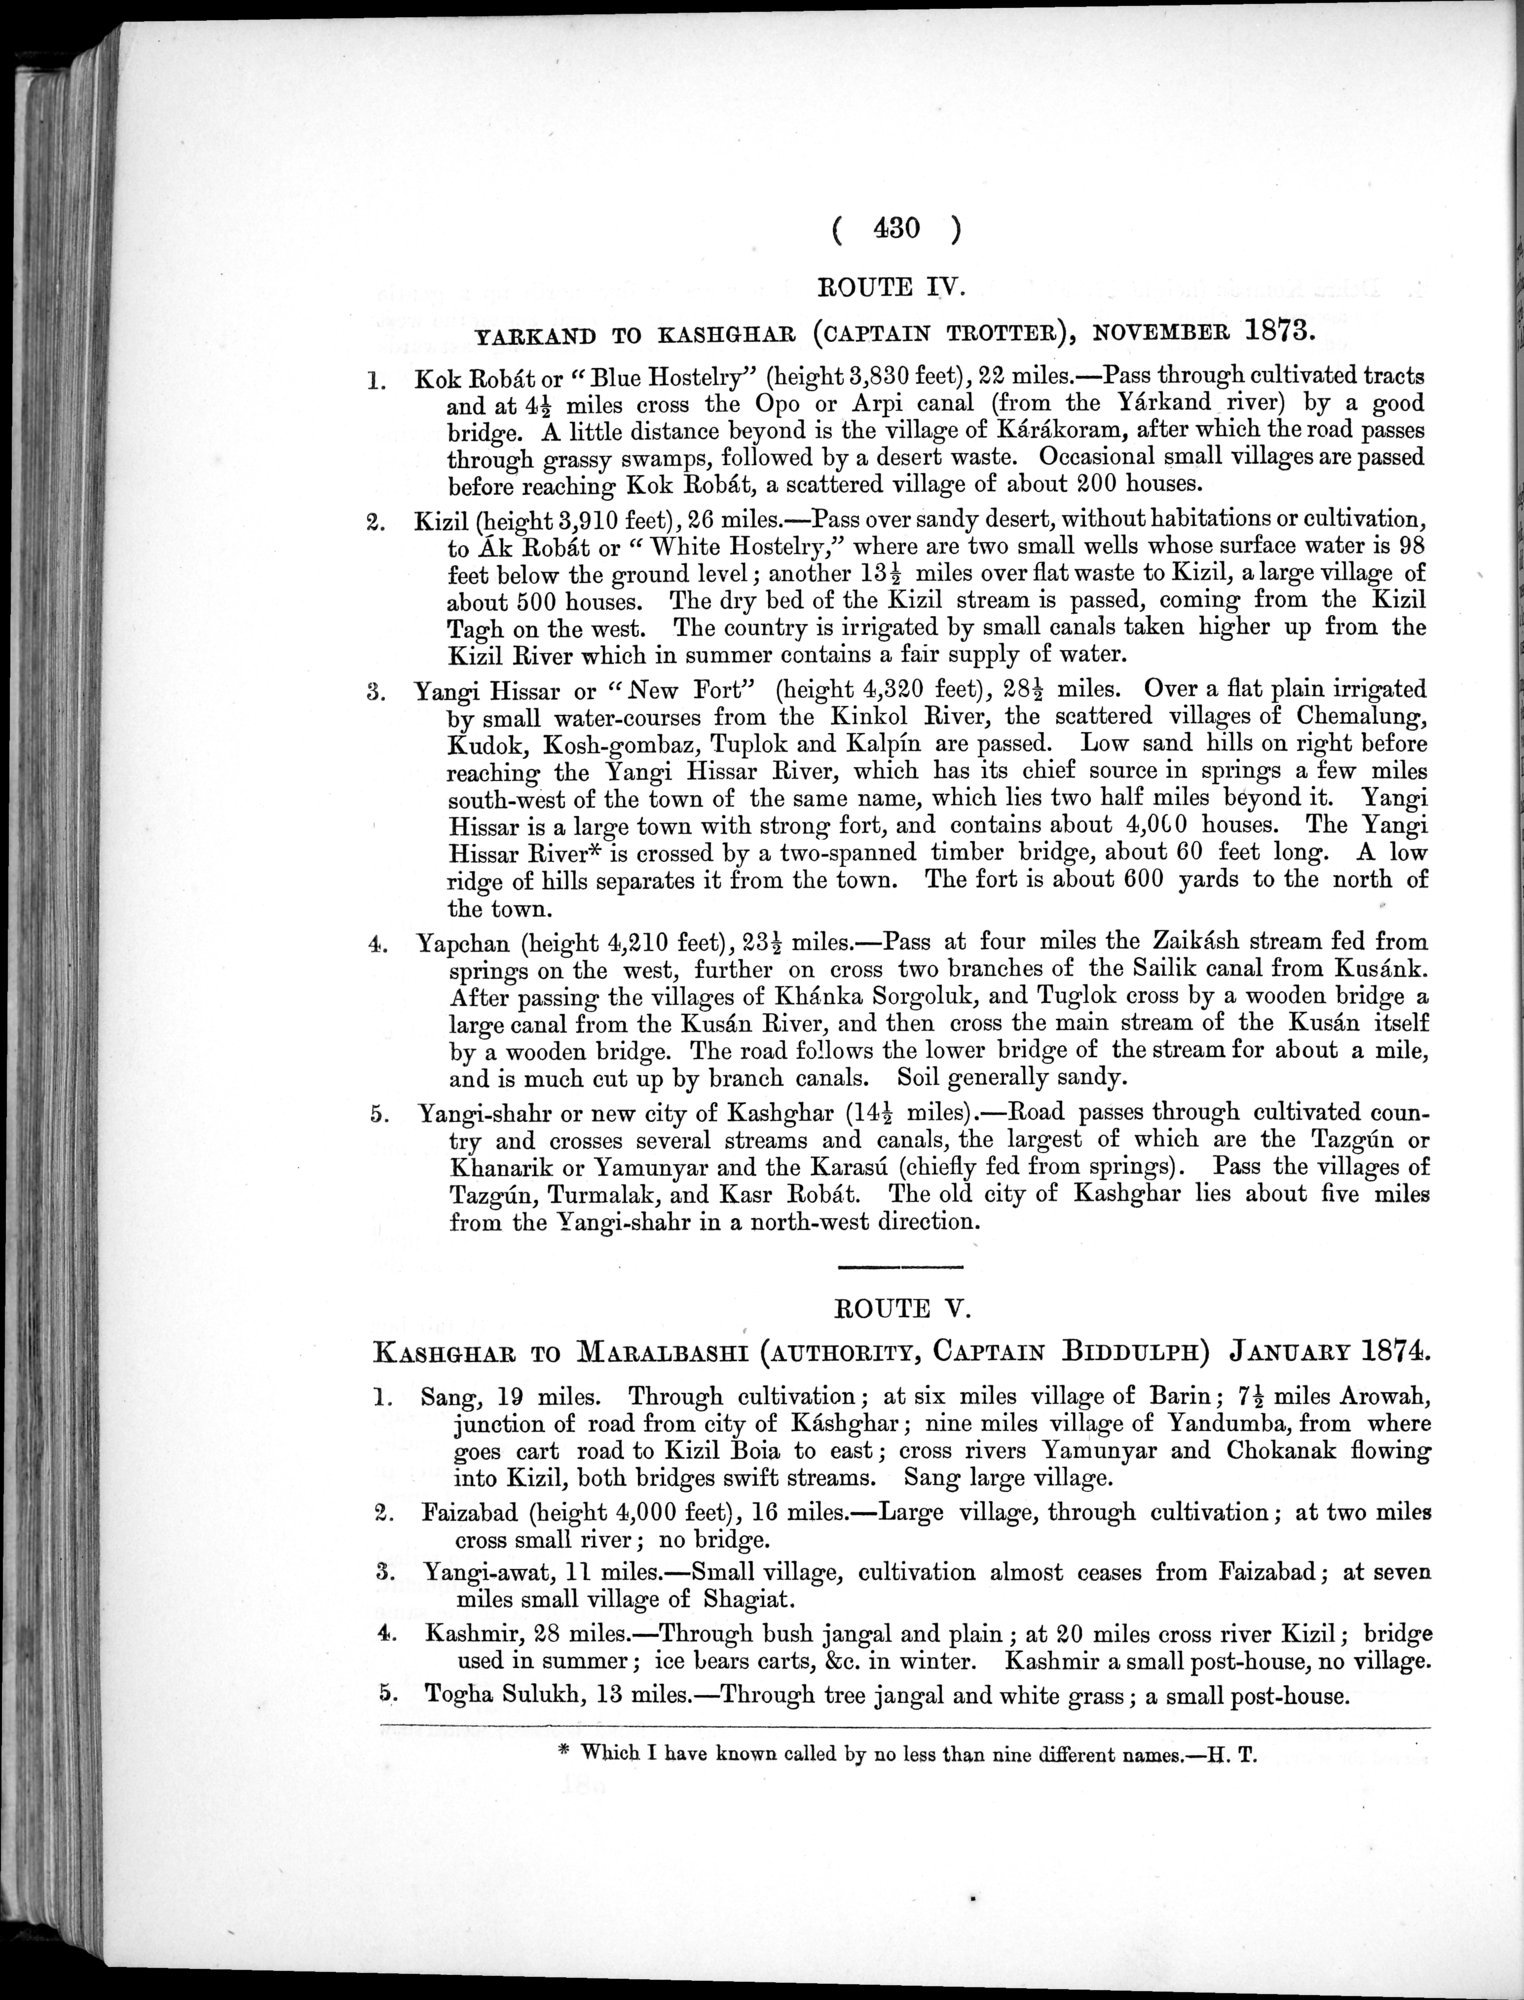 Report of a Mission to Yarkund in 1873 : vol.1 / Page 564 (Grayscale High Resolution Image)